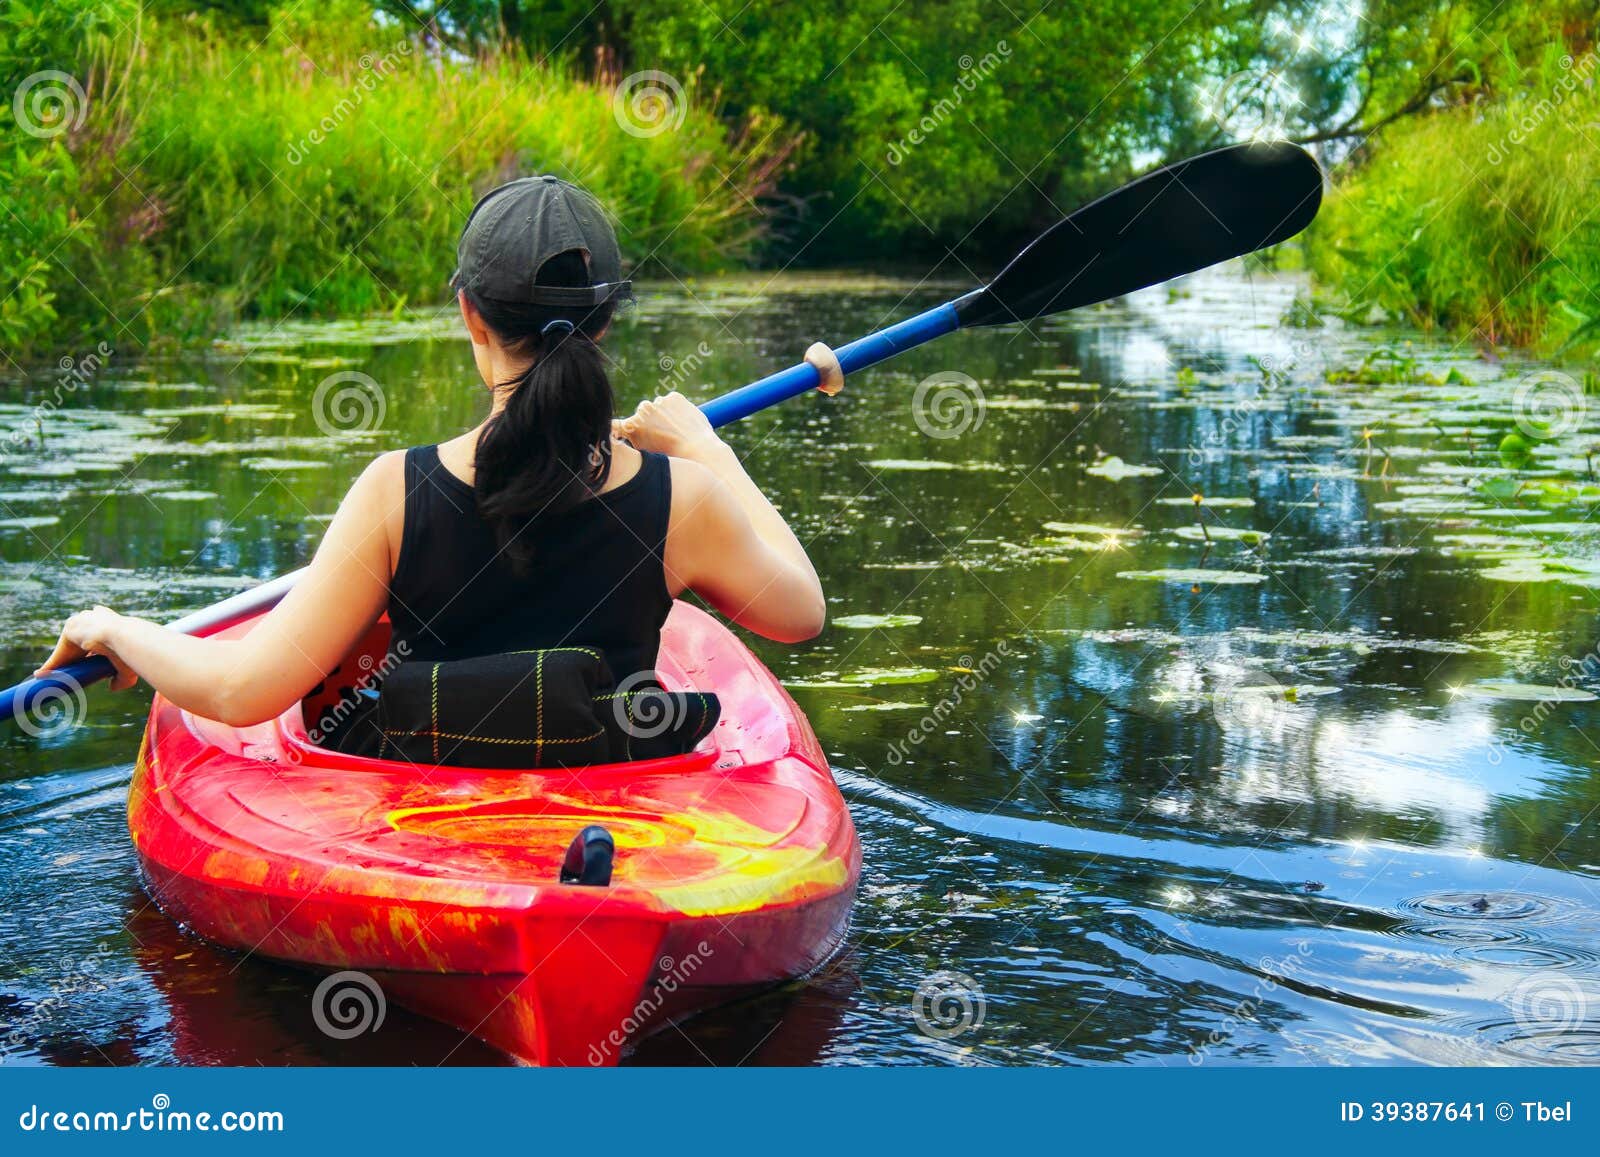 Girl with Paddle and Kayak 8 Stock Image - Image of tranquil, boat ...